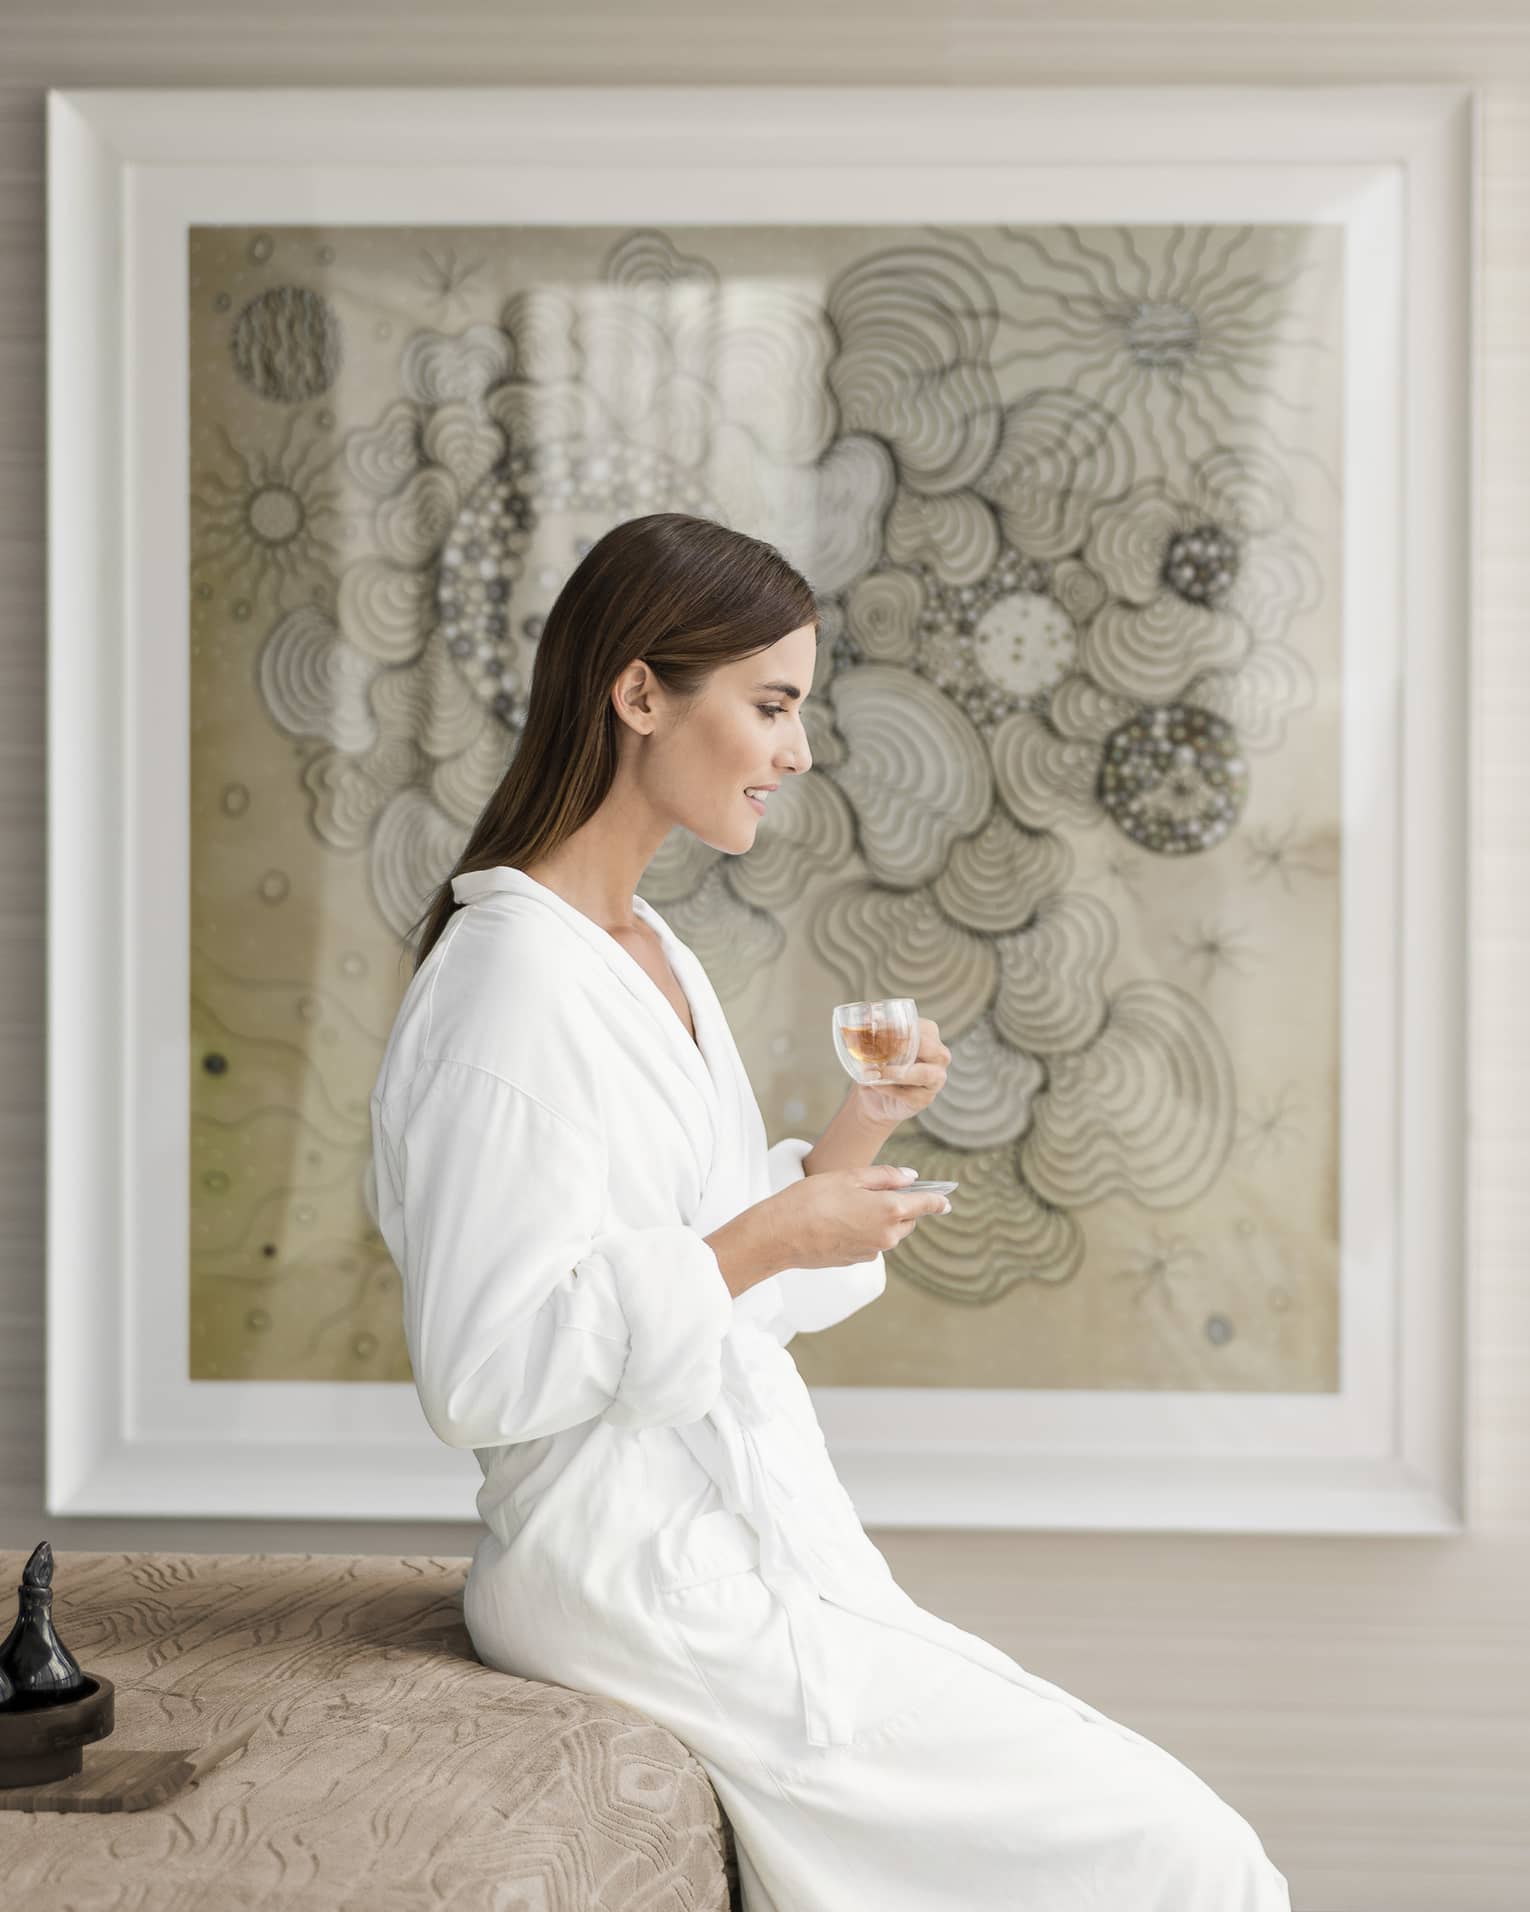 A woman in a white robe sipping from a small glass in front of a framed portrait.